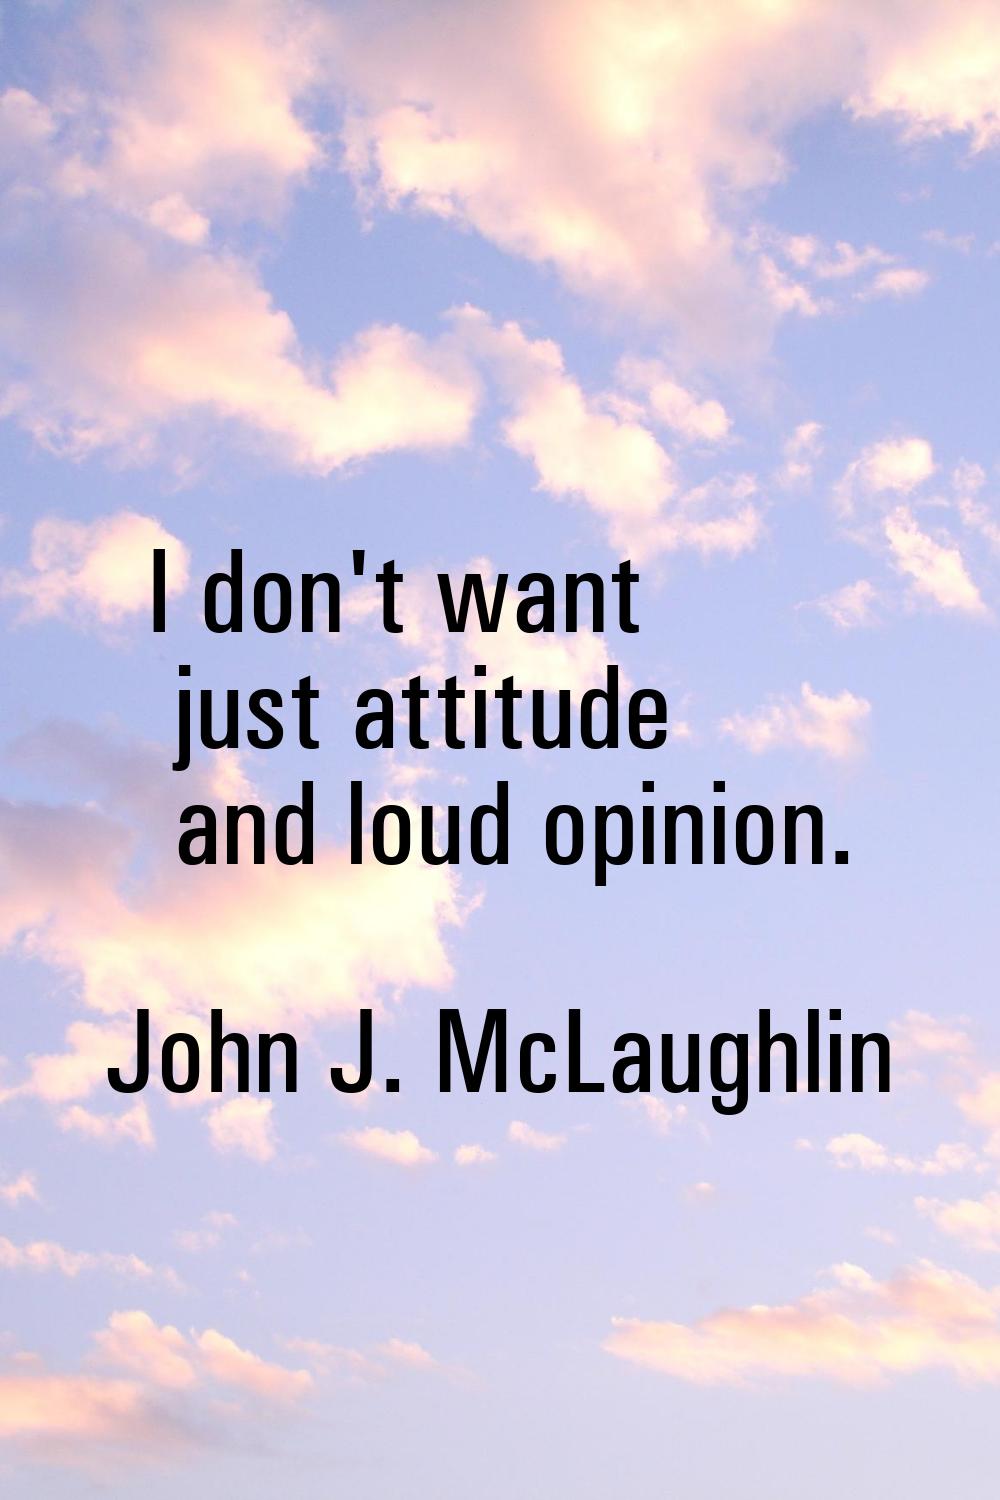 I don't want just attitude and loud opinion.